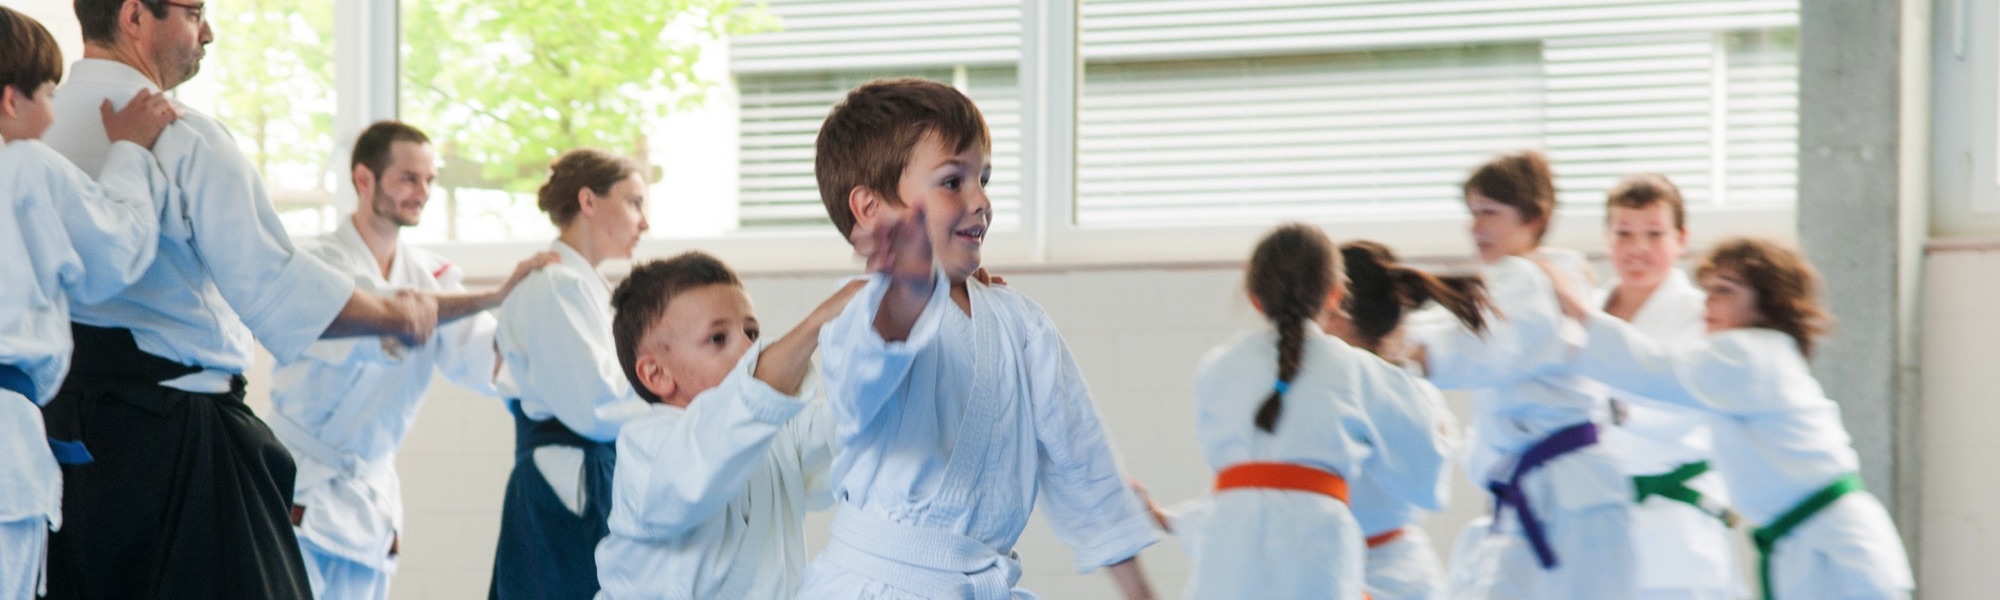 Aikido_Unlimited_Kinder01